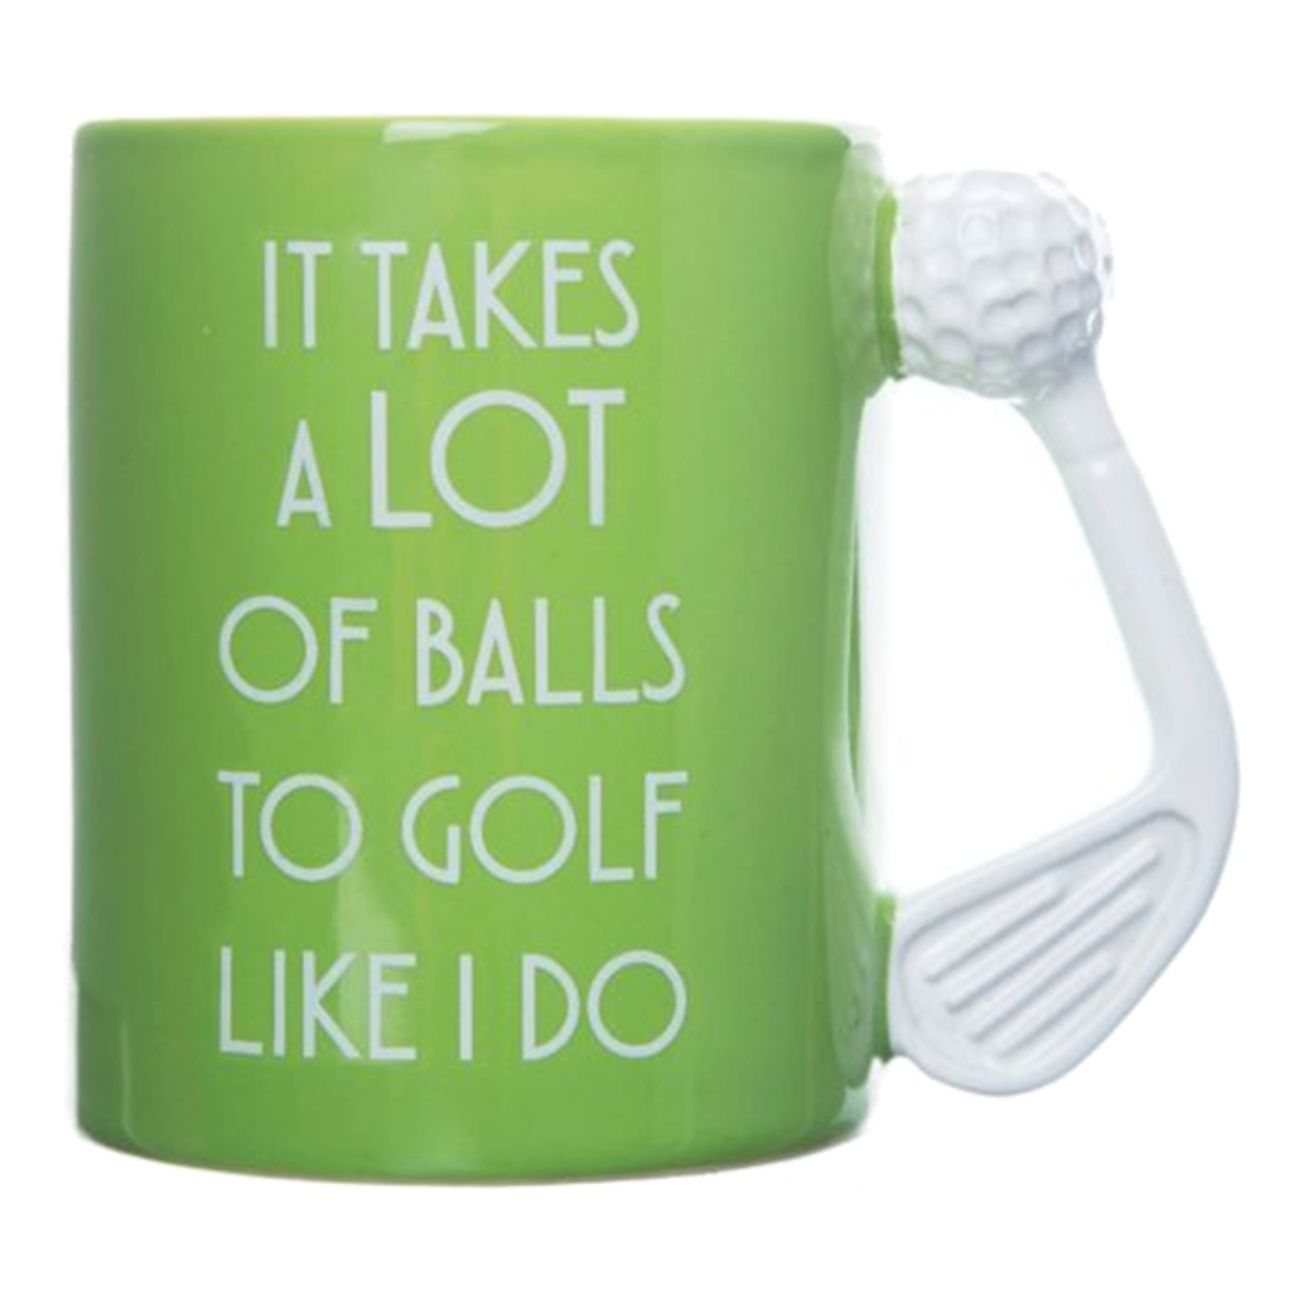 golf-mugg-it-takes-a-lot-of-balls-to-golf-like-i-do-74347-1